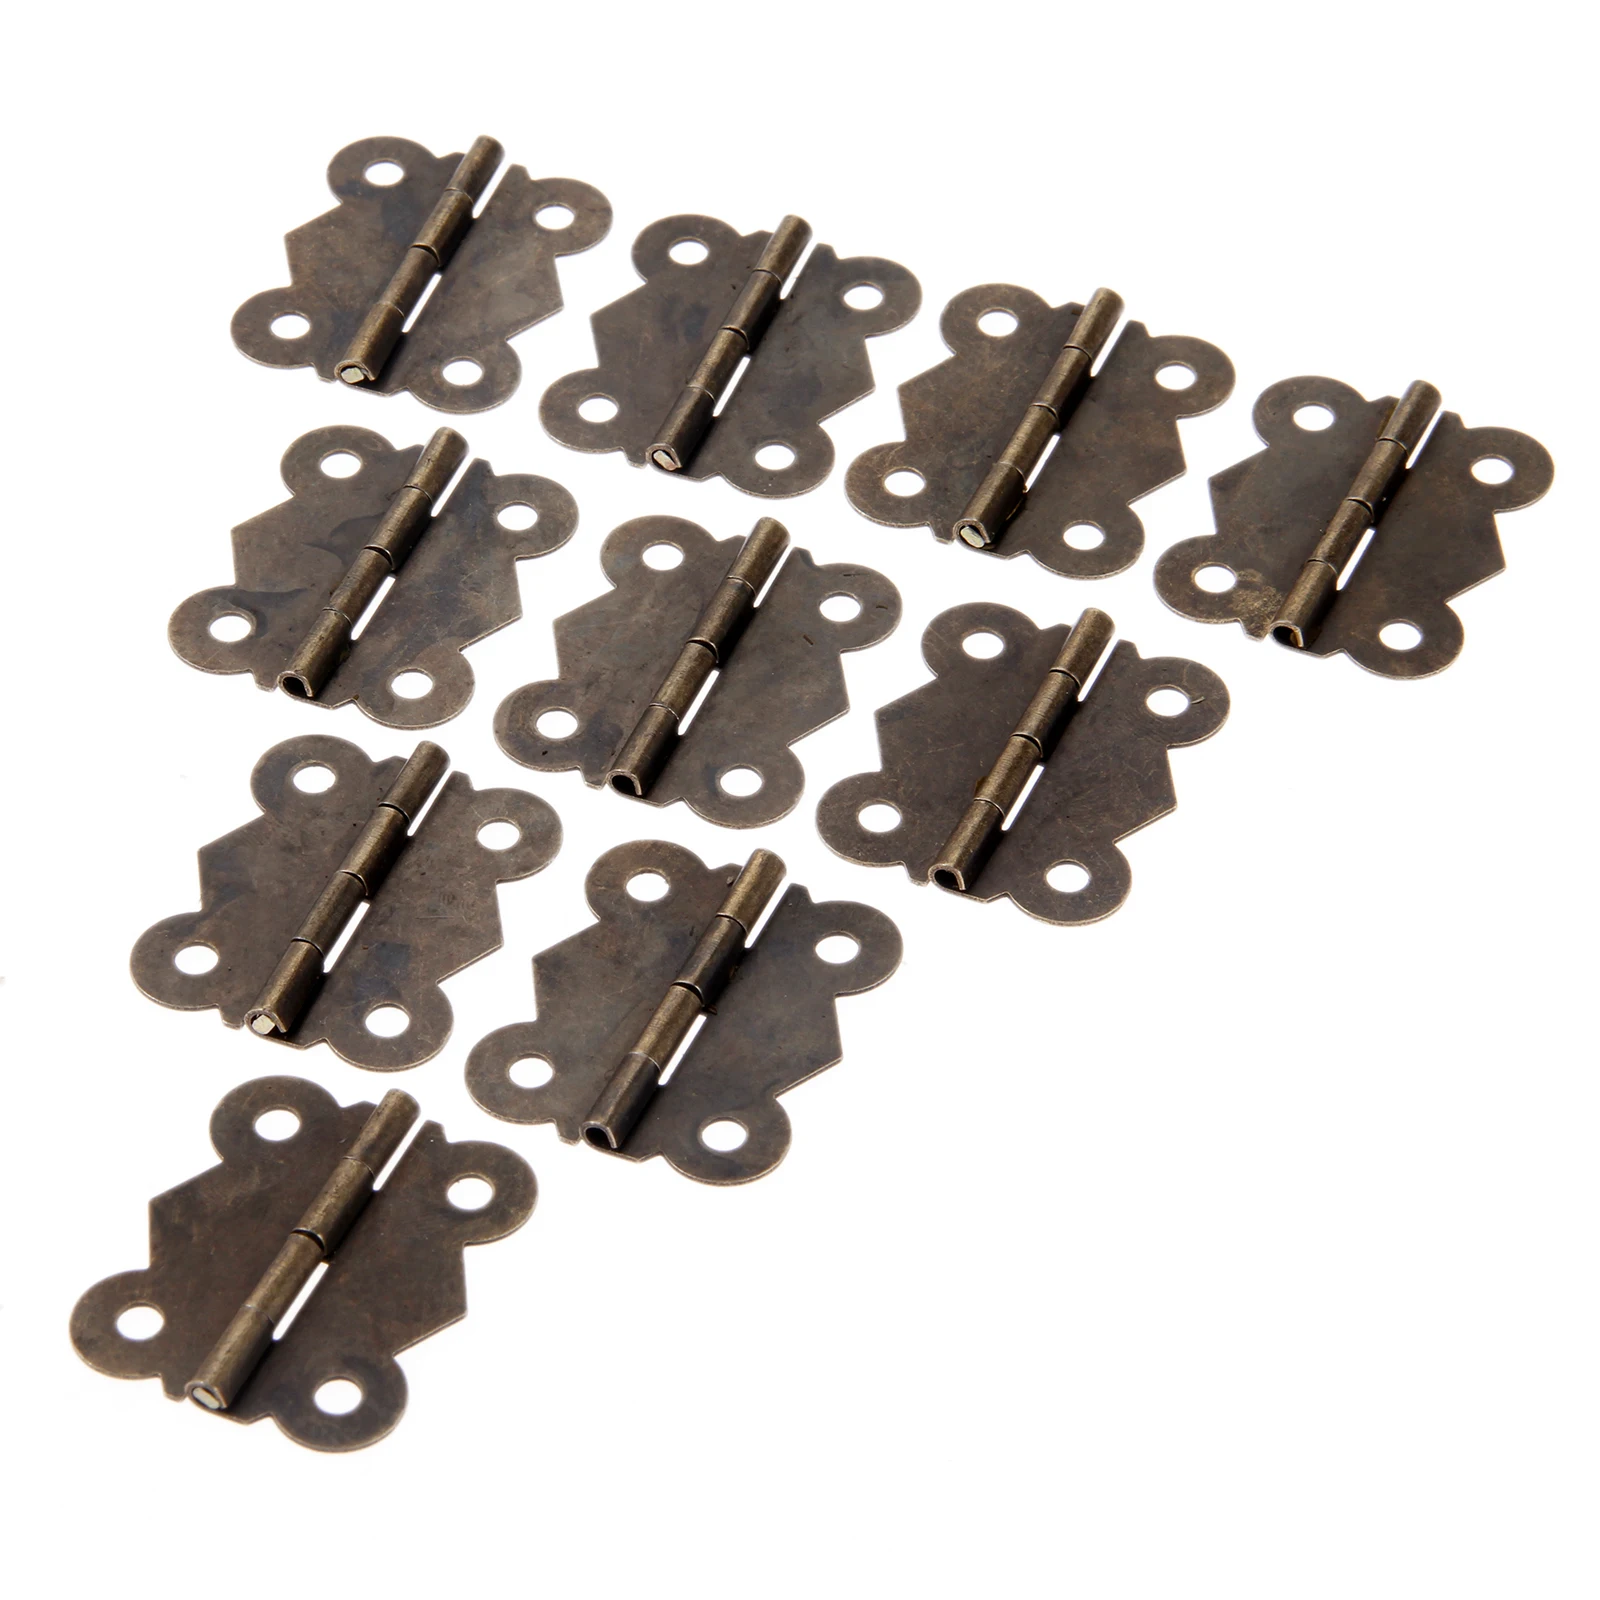 10Pcs Cabinet Furniture Hinges Jewelry Wooden Boxes 4 Hole Butterfly Vintage Hinge Furniture Fittings For Door Cabinets